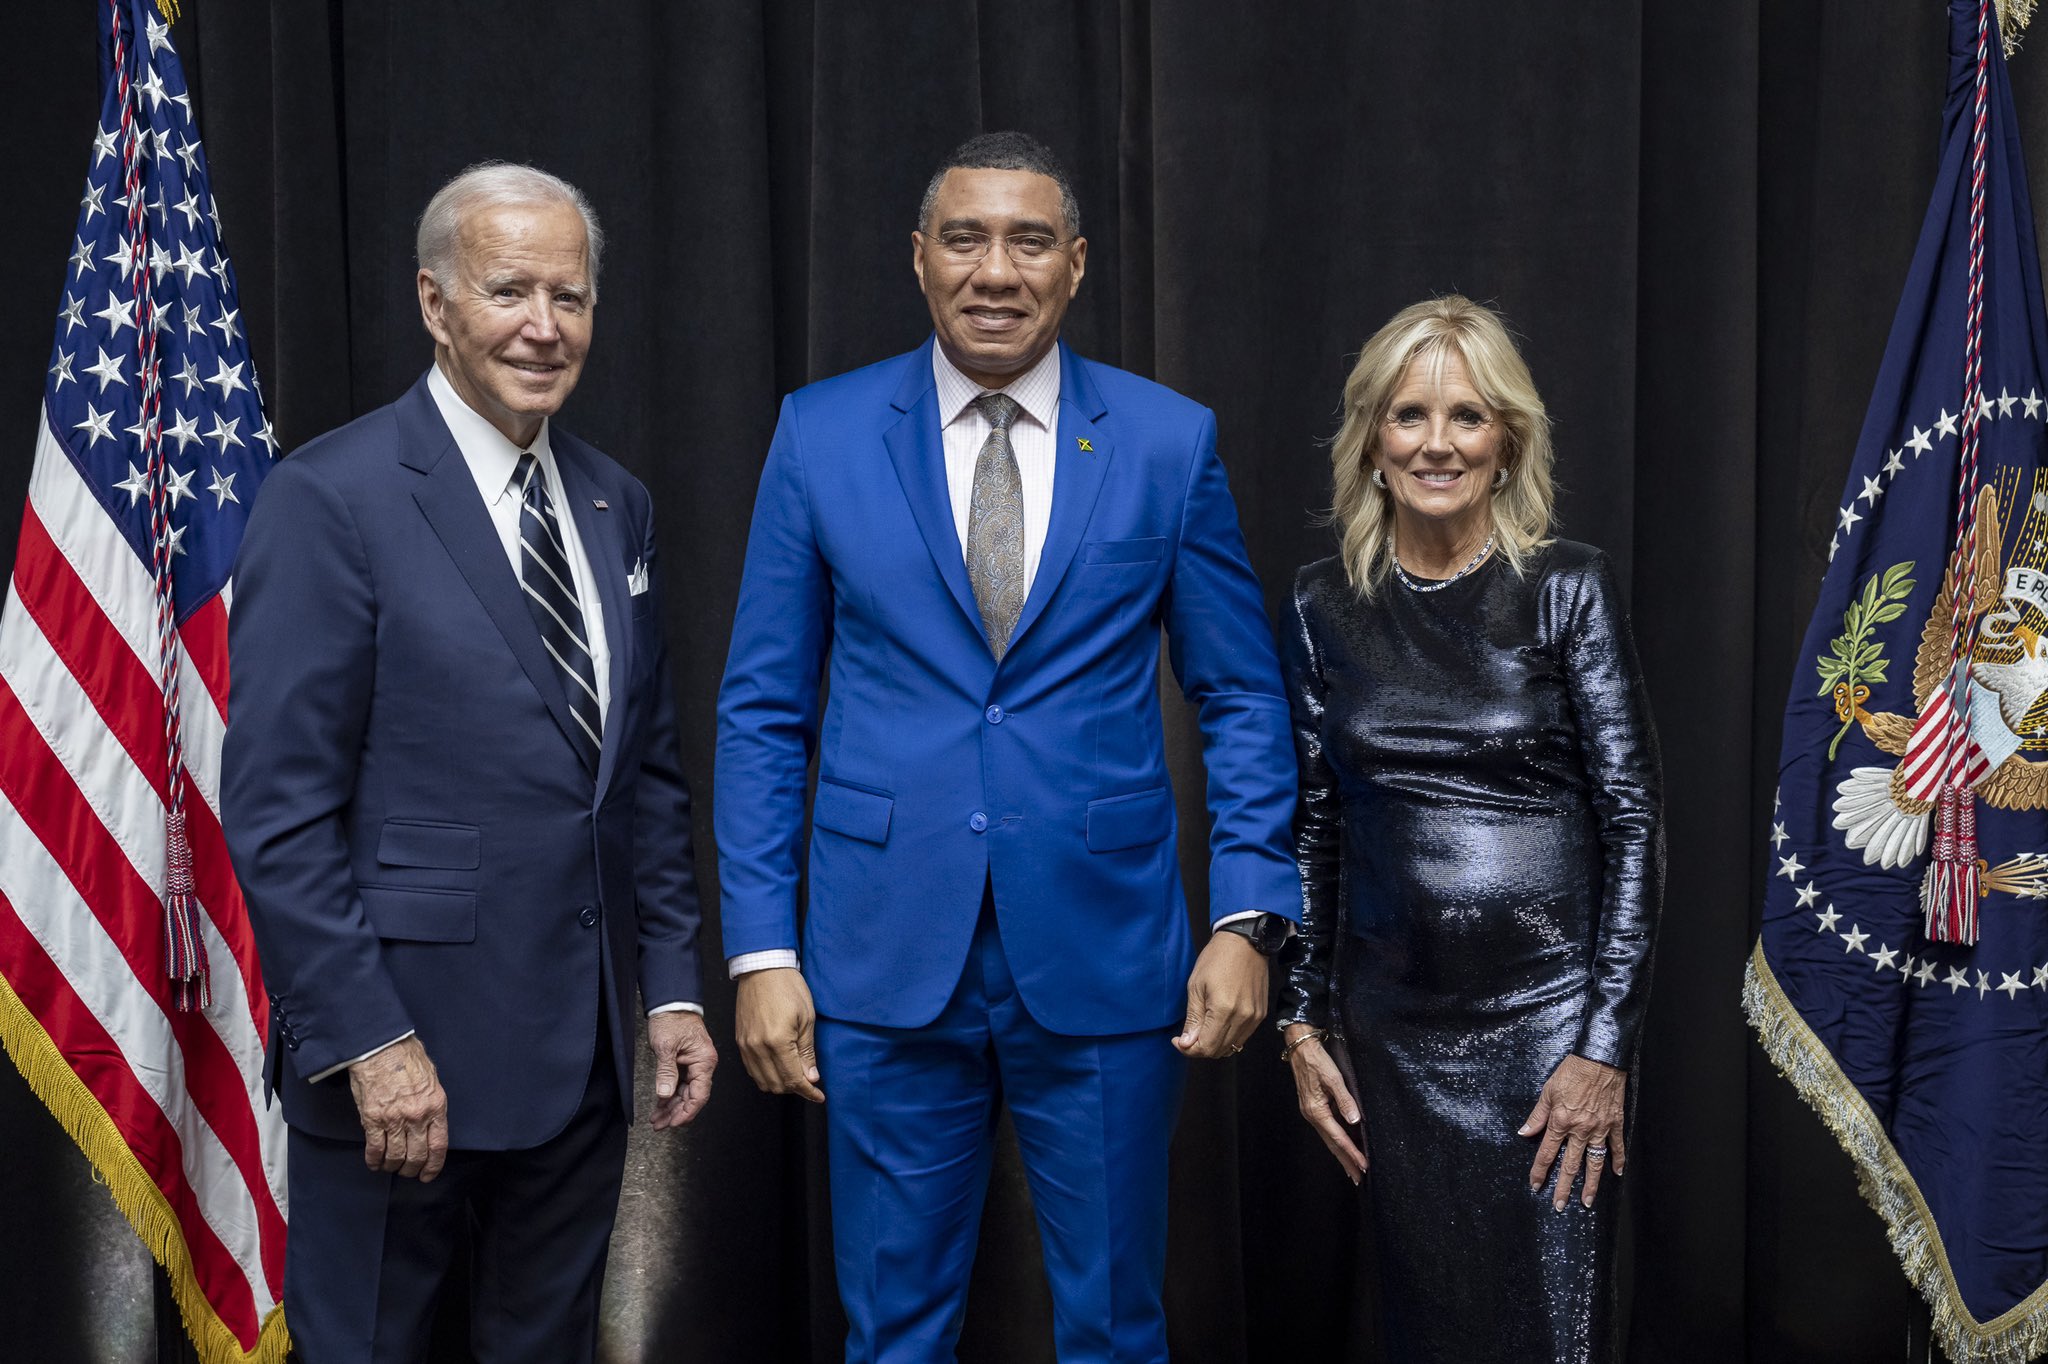 Andrew Holness on Twitter: "President of the United States Joe Biden and his wife, First Lady Dr Jill Biden, hosted leaders in New York for the 77th United Nations General Assembly at